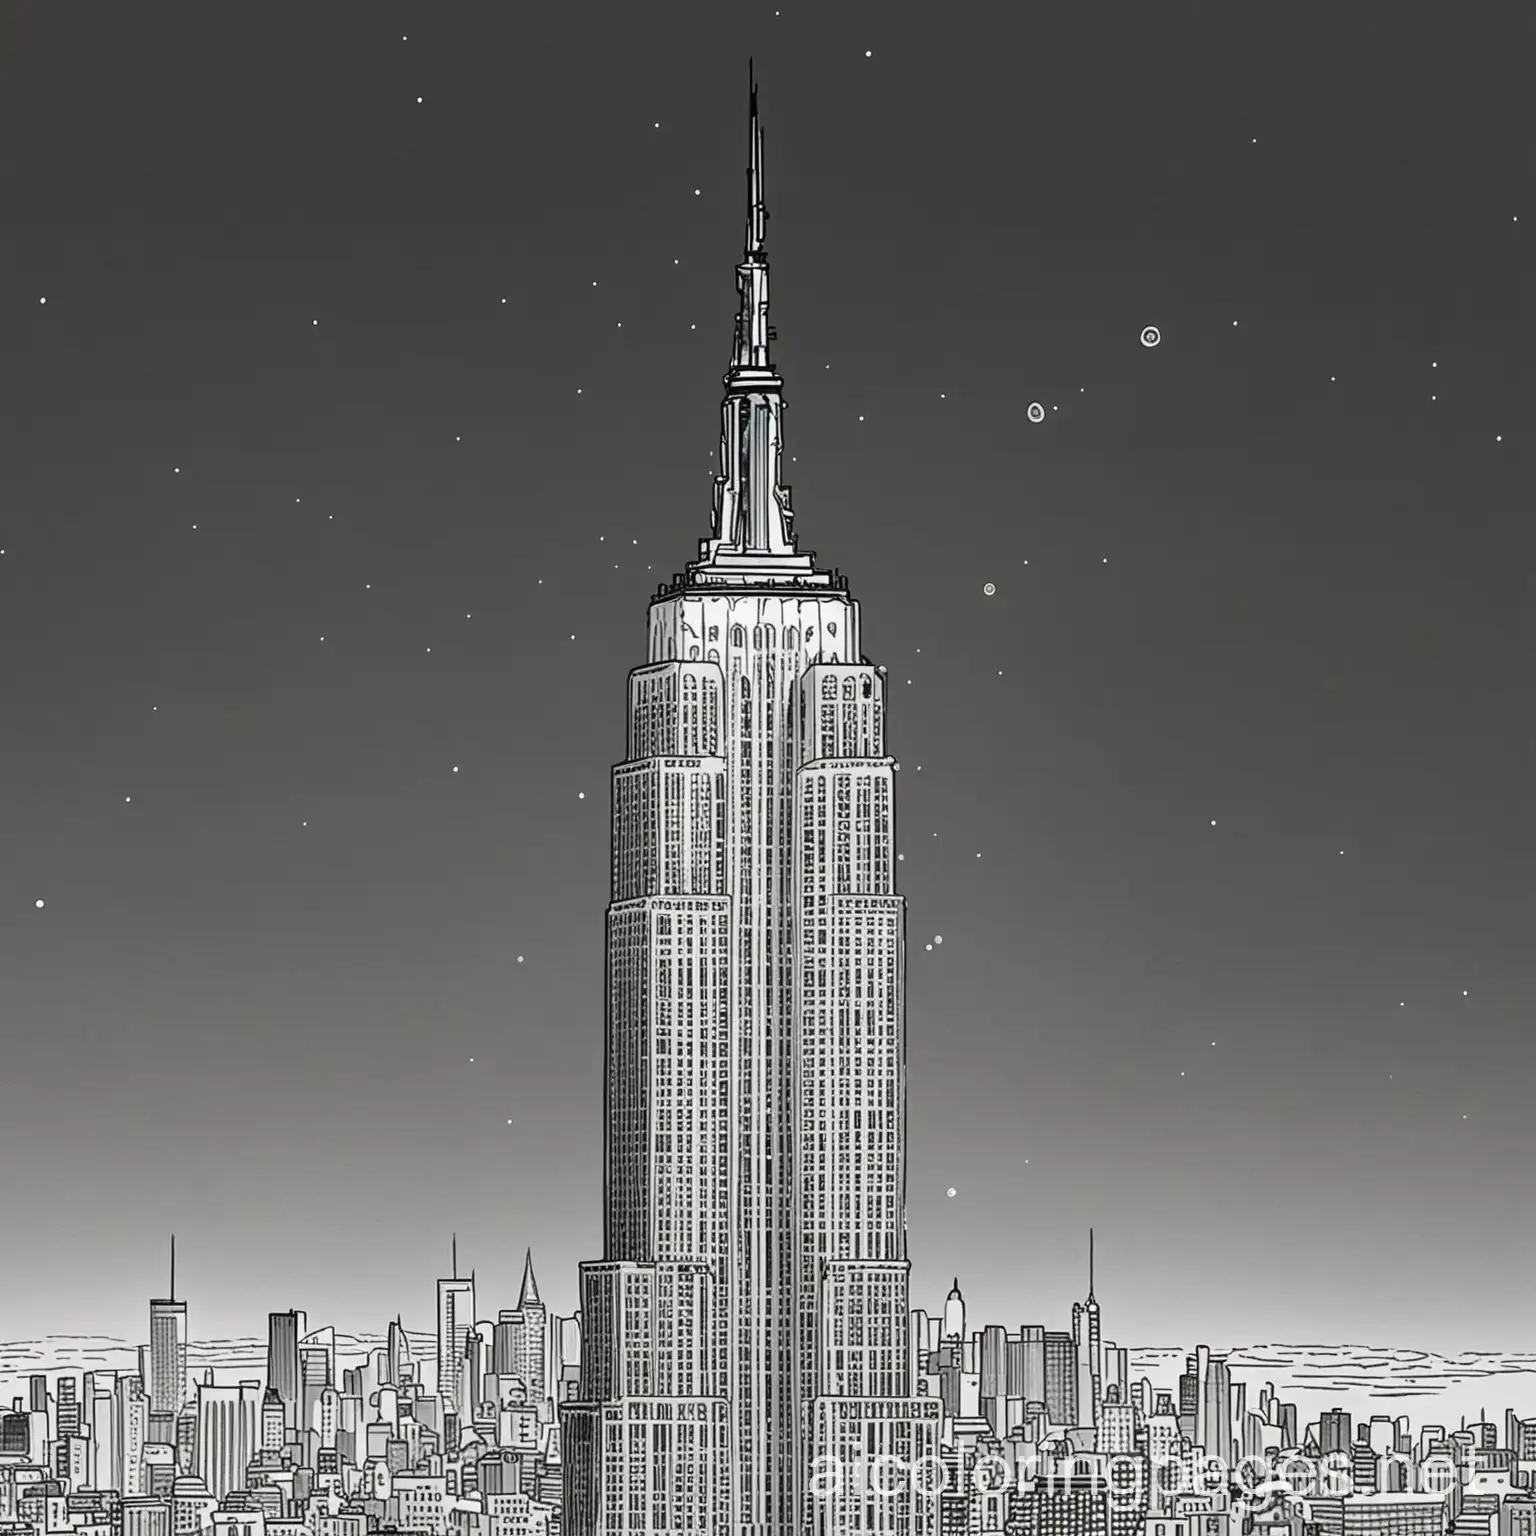 Empire State Building that is high up in outer space, Coloring Page, black and white, line art, white background, Simplicity, Ample White Space. The background of the coloring page is plain white to make it easy for young children to color within the lines. The outlines of all the subjects are easy to distinguish, making it simple for kids to color without too much difficulty